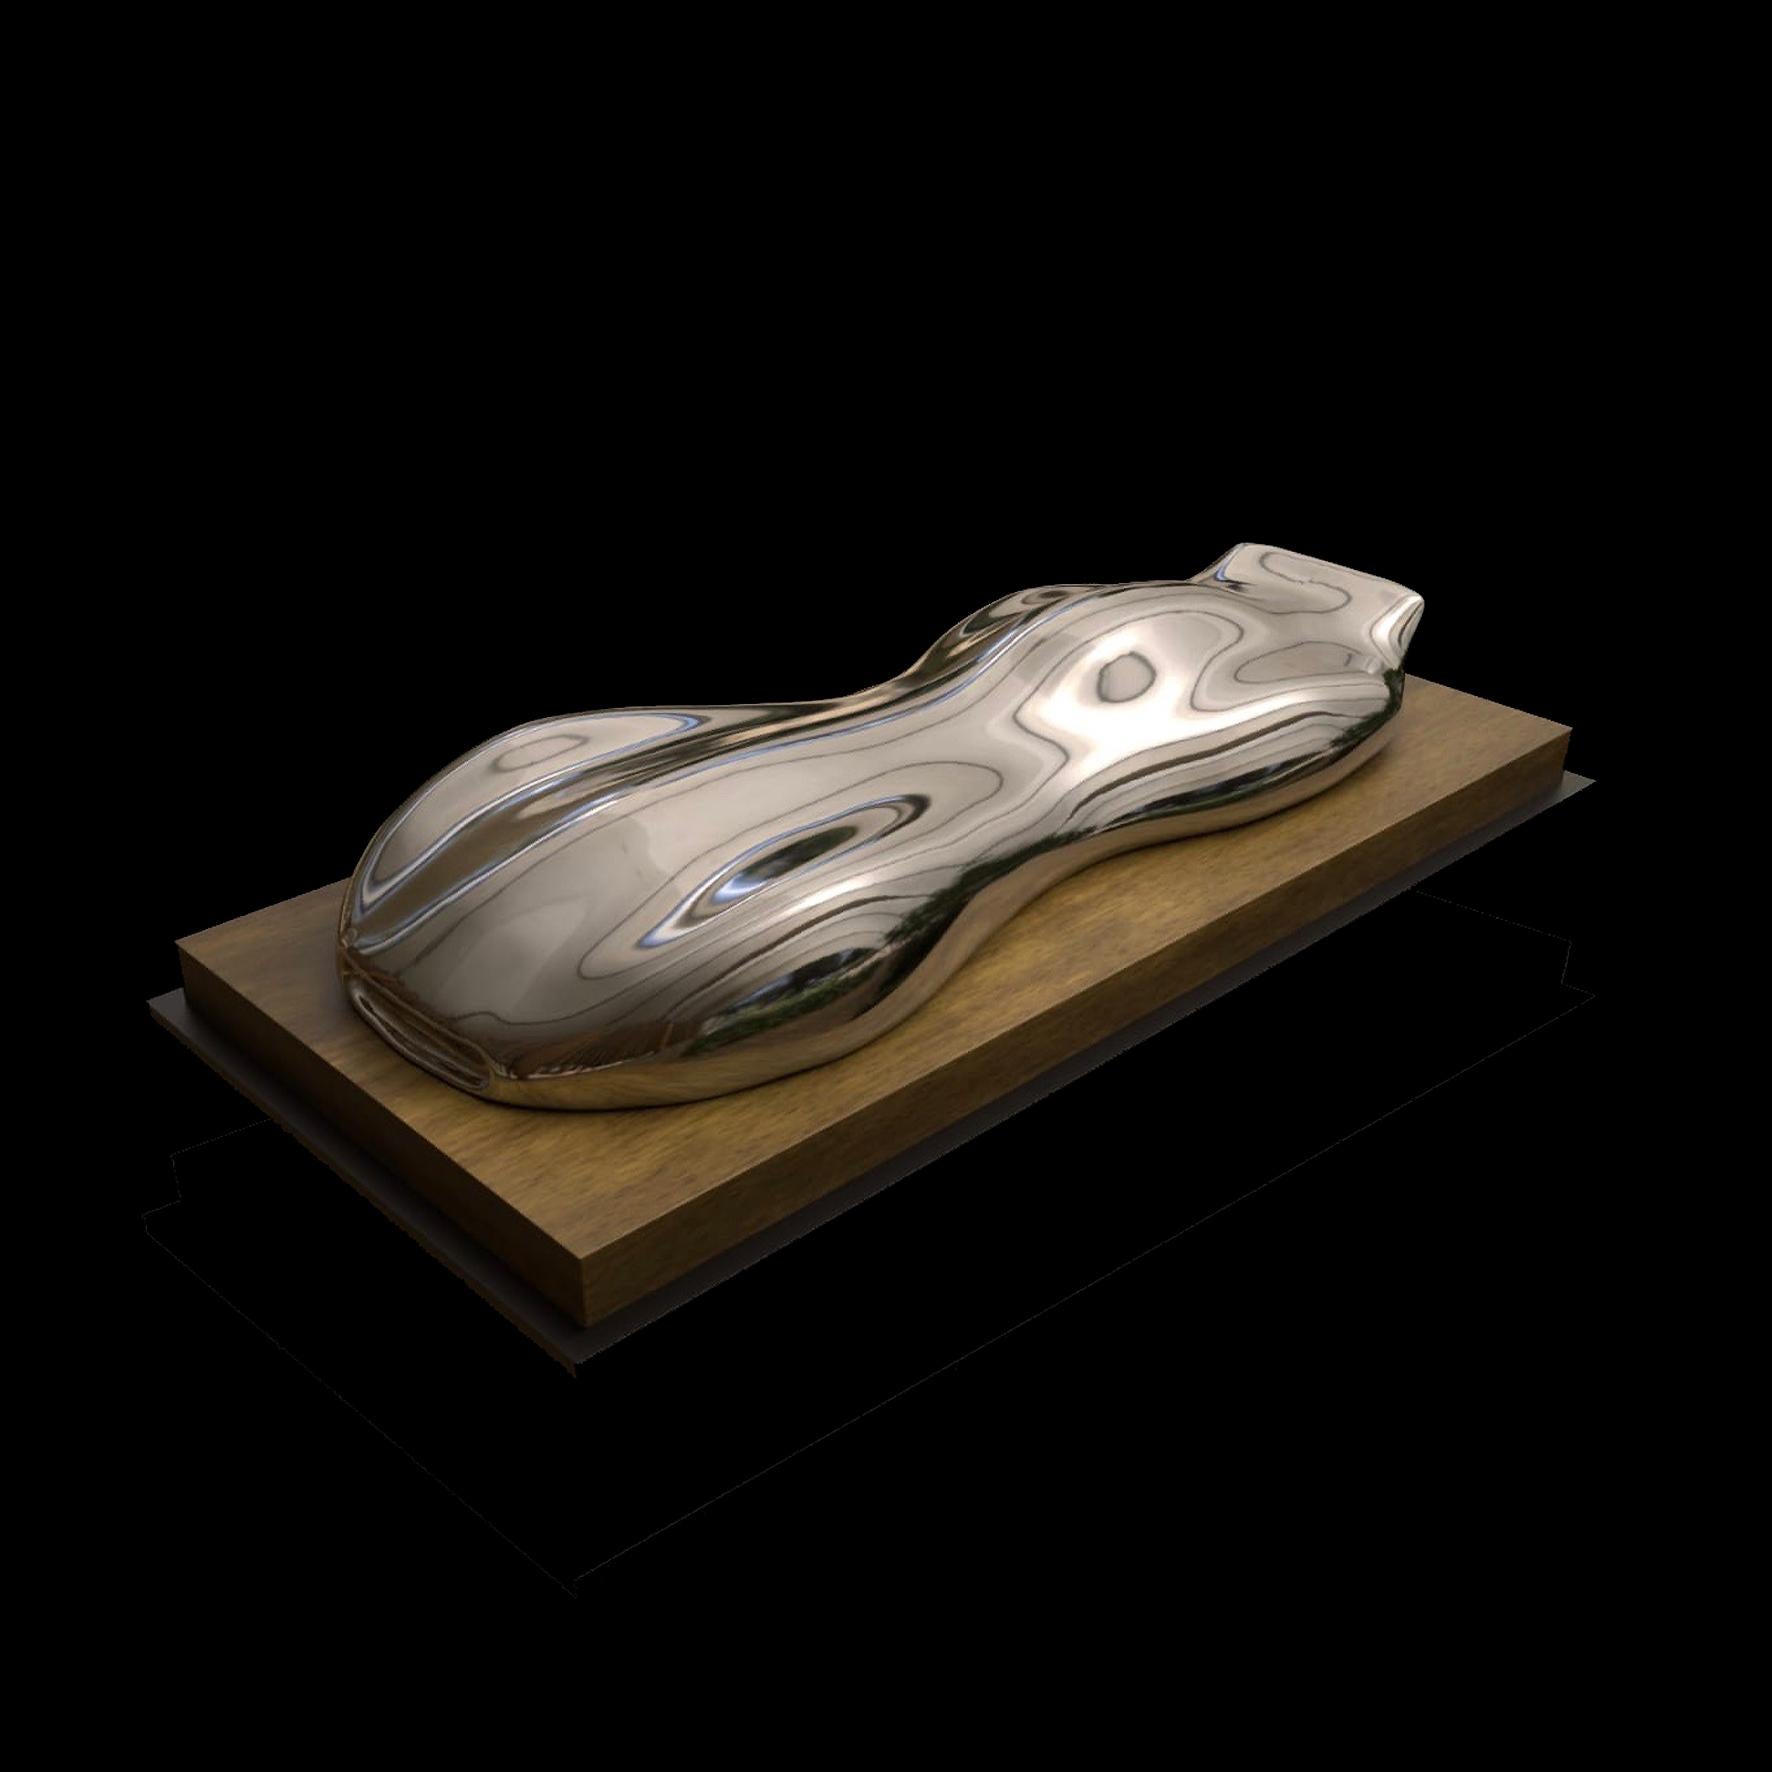 Musso

A silvered plaster model of a racing car.
On a Cheyenne marble or rectangular wood base.

Belzoni finds inspiration in the legendary racing cars of the 1950s and the 1960s.
His elegant sculptures epitomize the spirit of a glorious